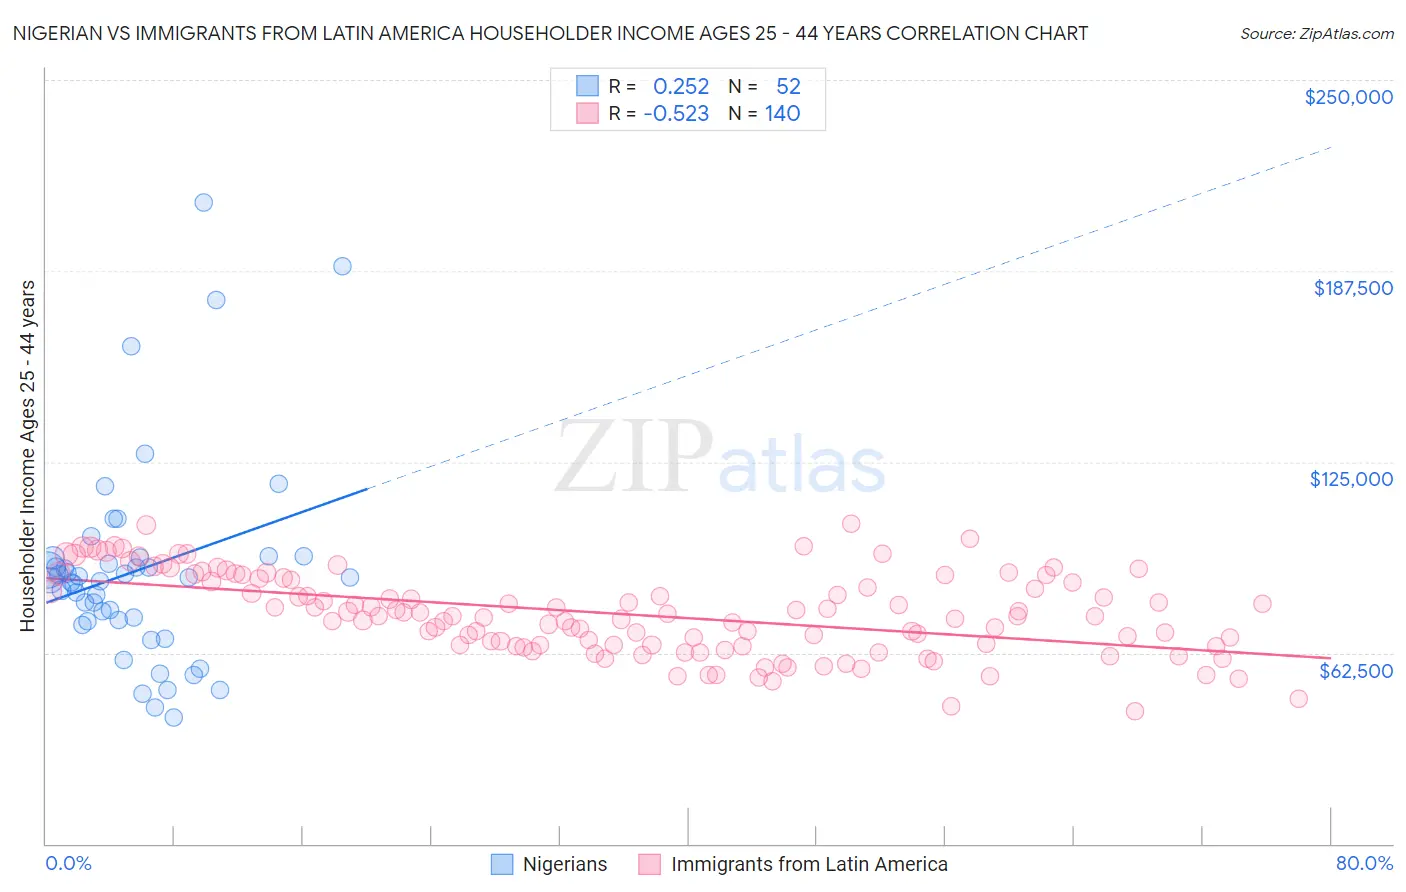 Nigerian vs Immigrants from Latin America Householder Income Ages 25 - 44 years